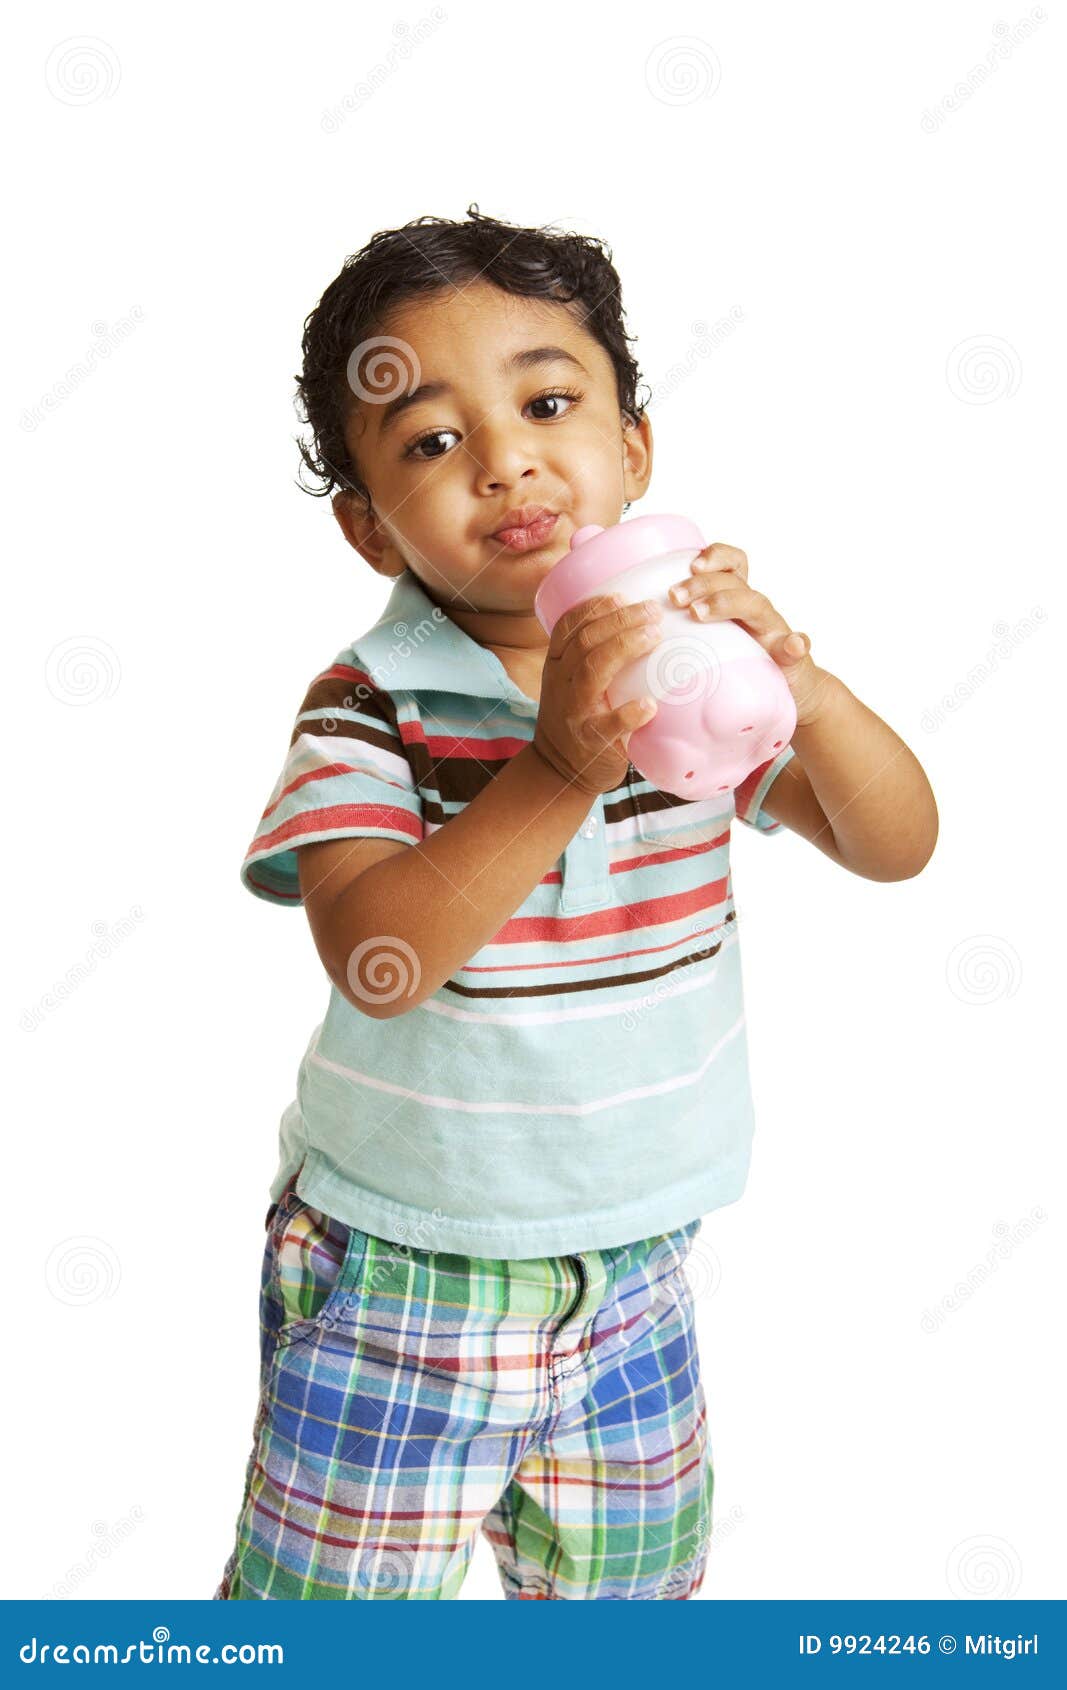 https://thumbs.dreamstime.com/z/toddler-drinking-water-cup-9924246.jpg